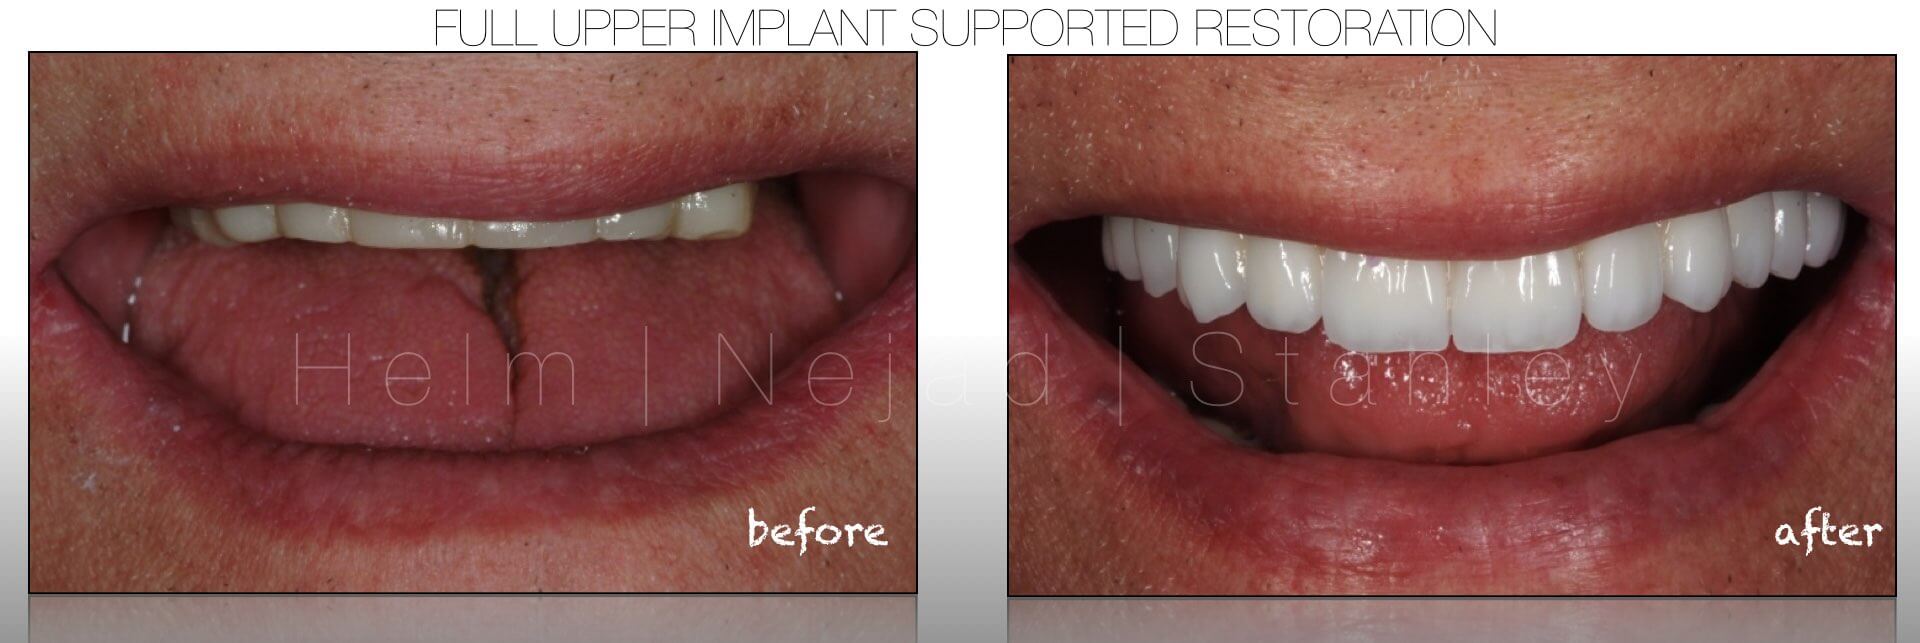 Dental Implants supporting a cosmetic full upper restoration